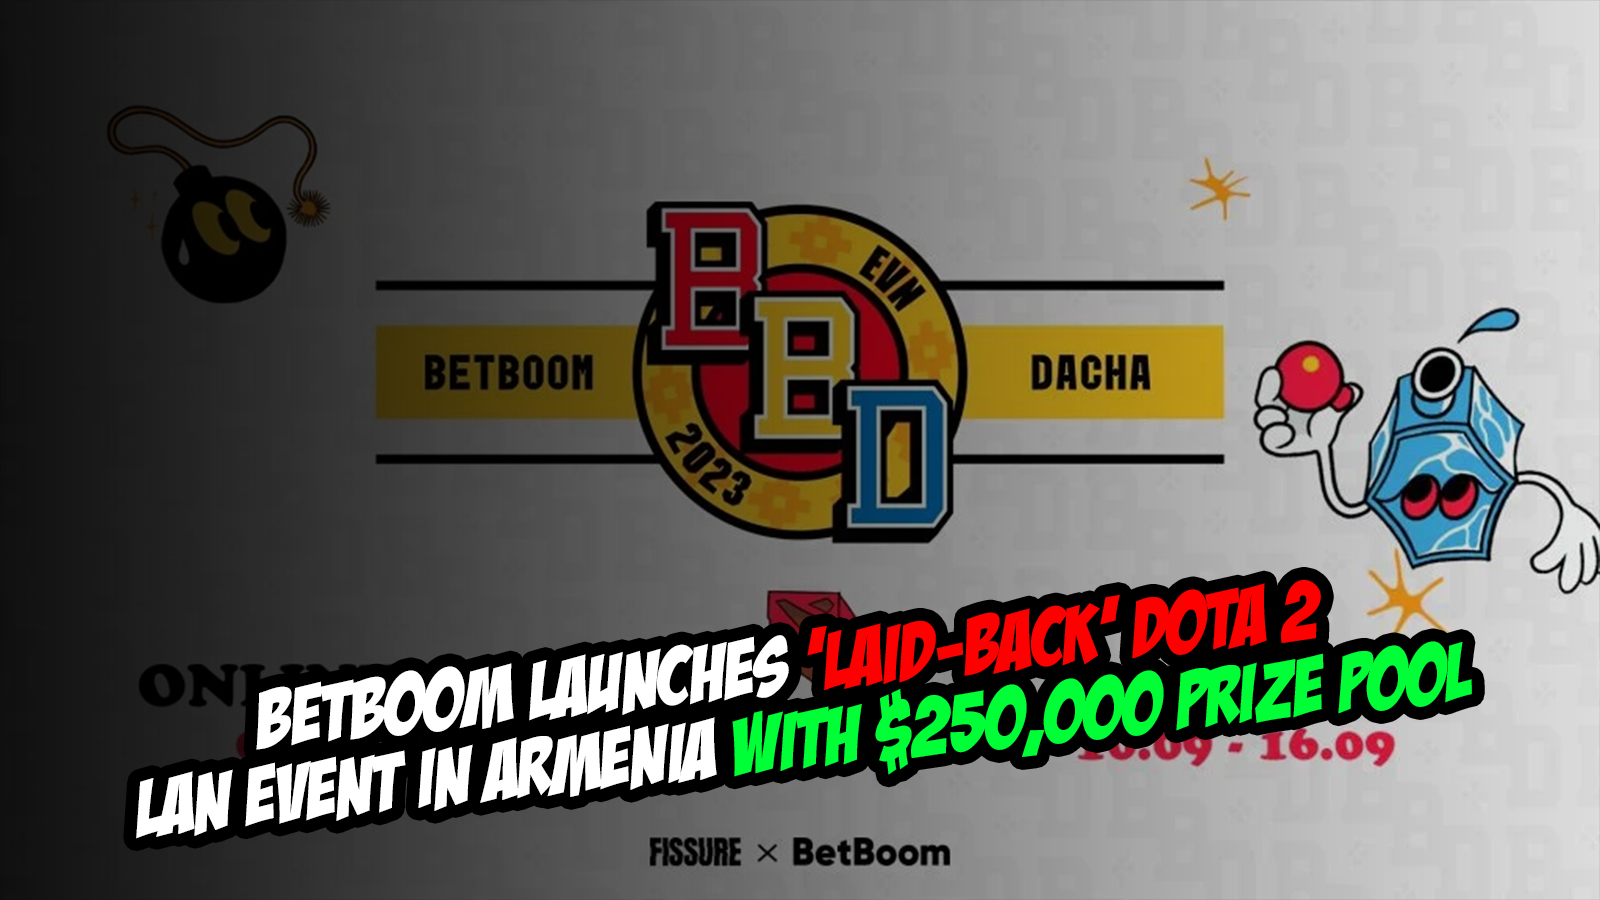 BetBoom Launches ‘Laid-Back’ Dota 2 LAN Event in Armenia with $250,000 Prize Pool